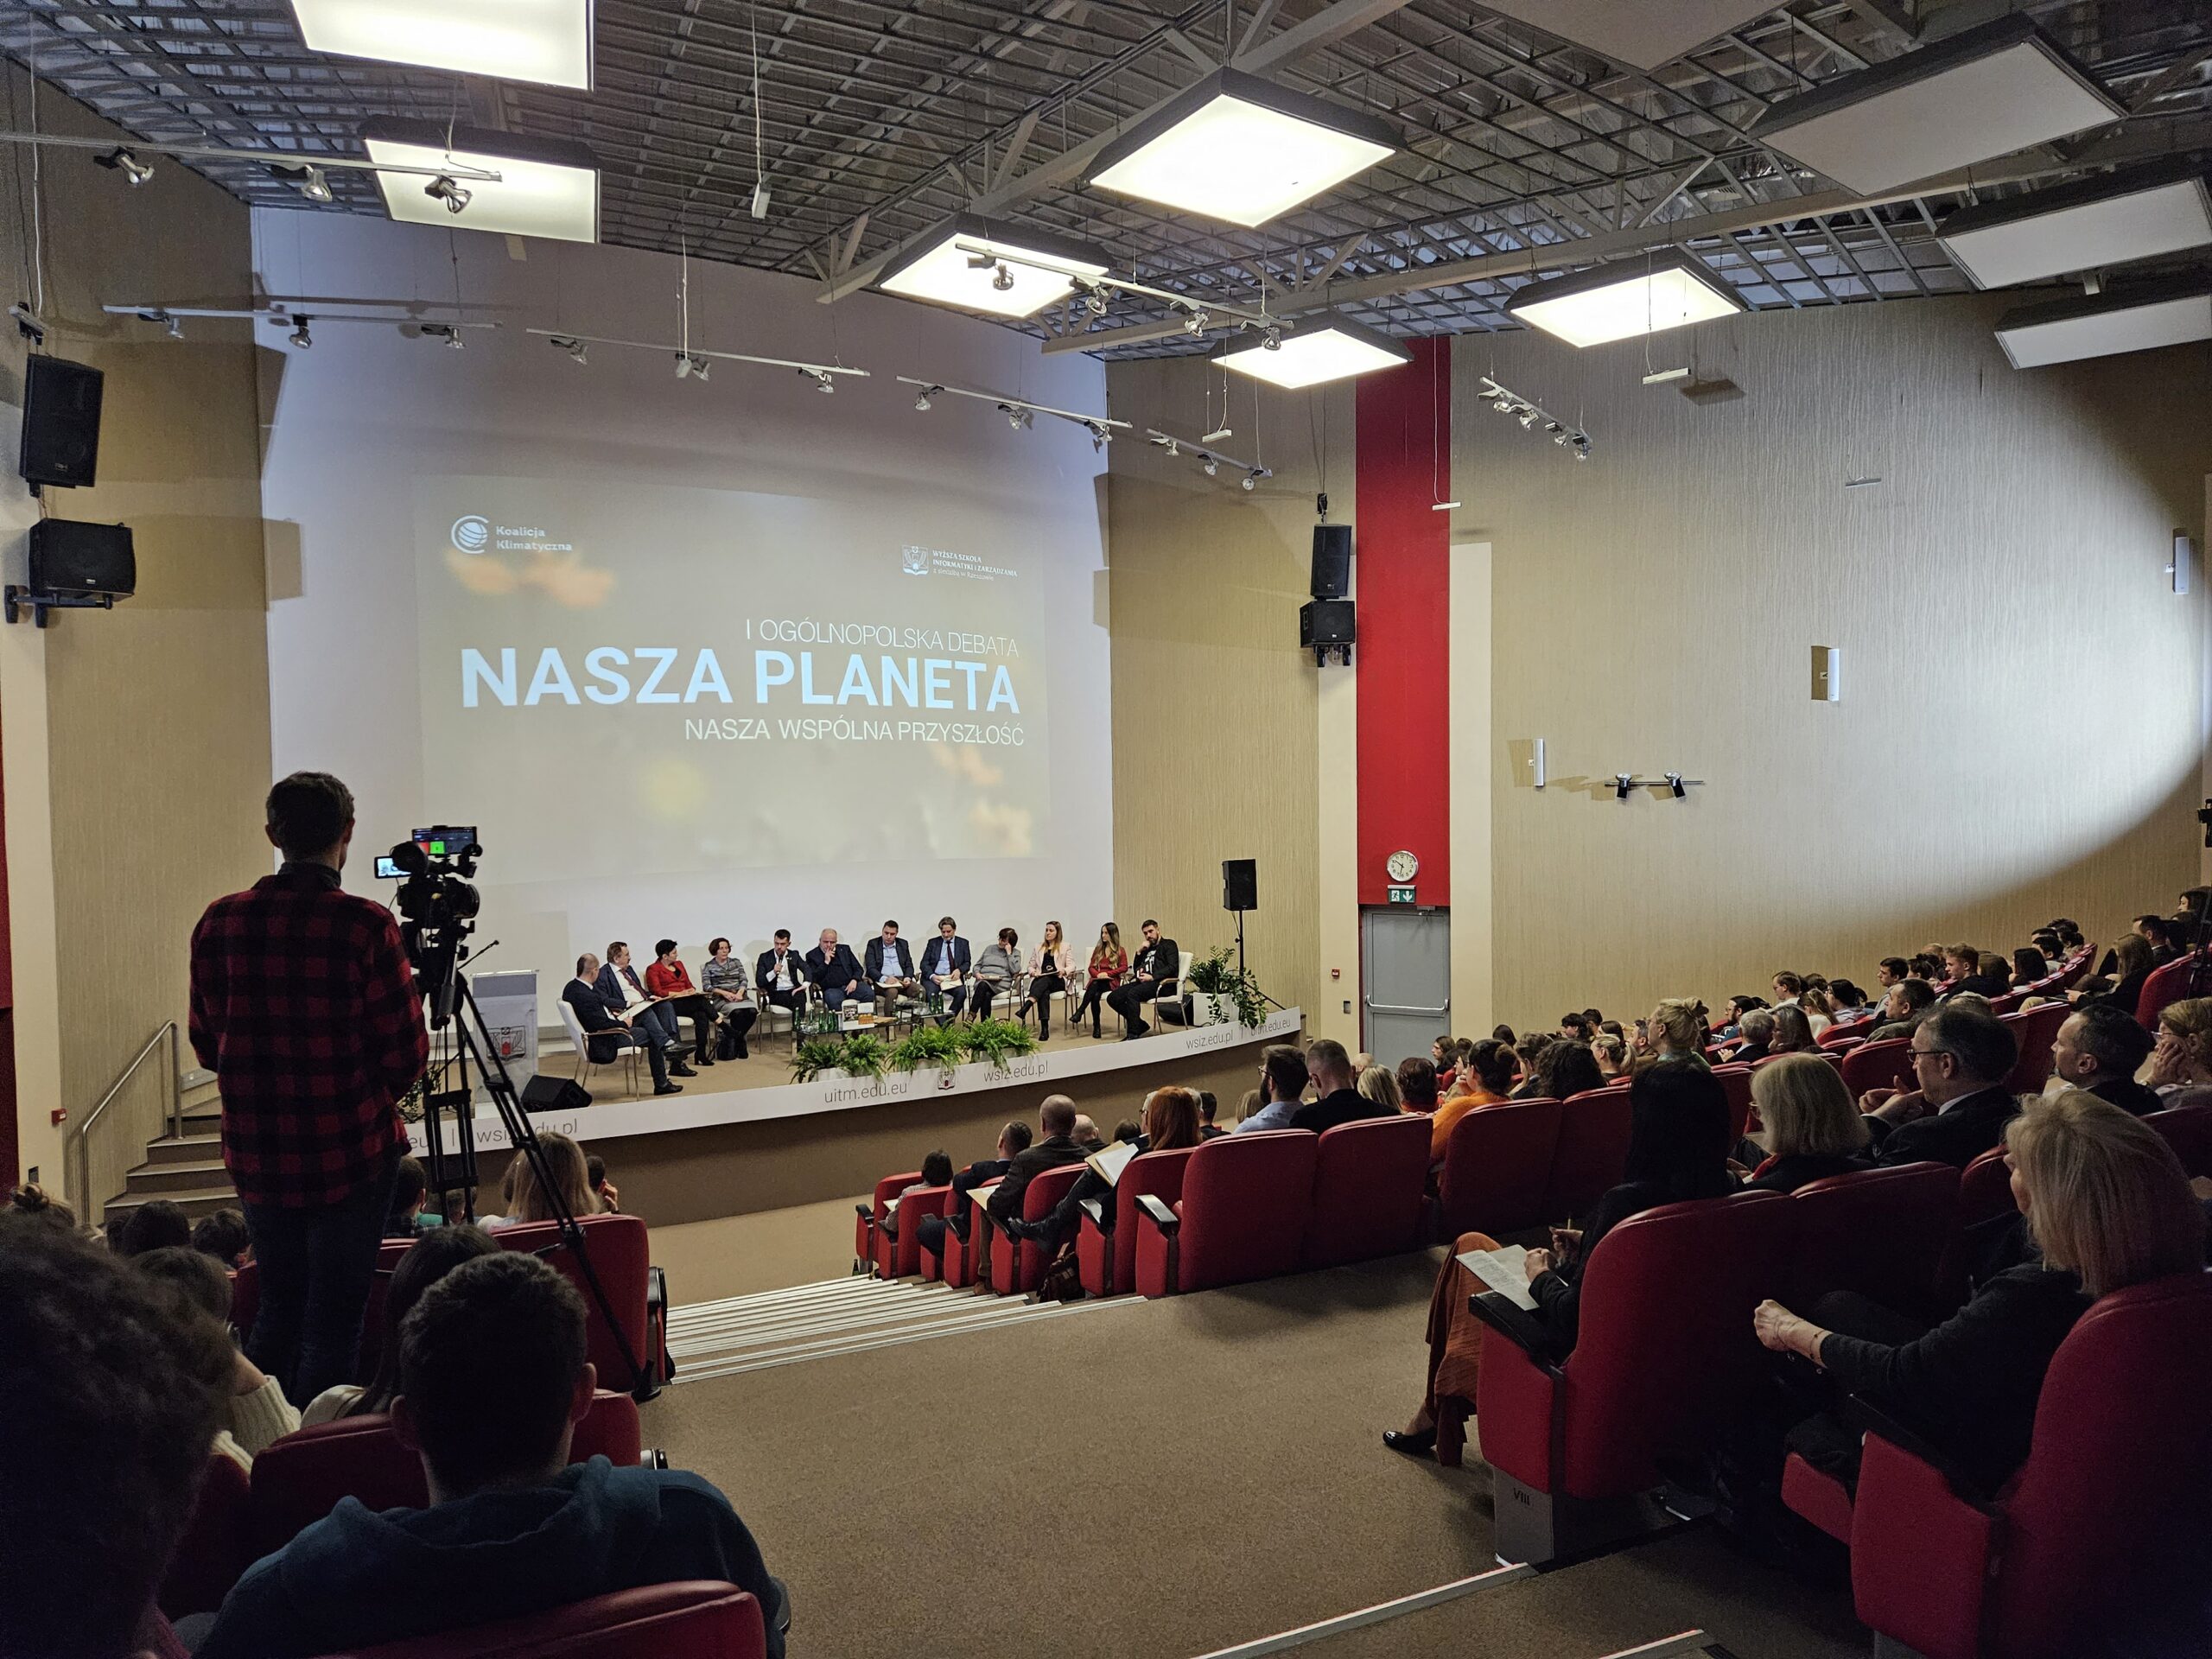 Talk about agriculture and climate change during the debate “Our Planet – Our Common Future”